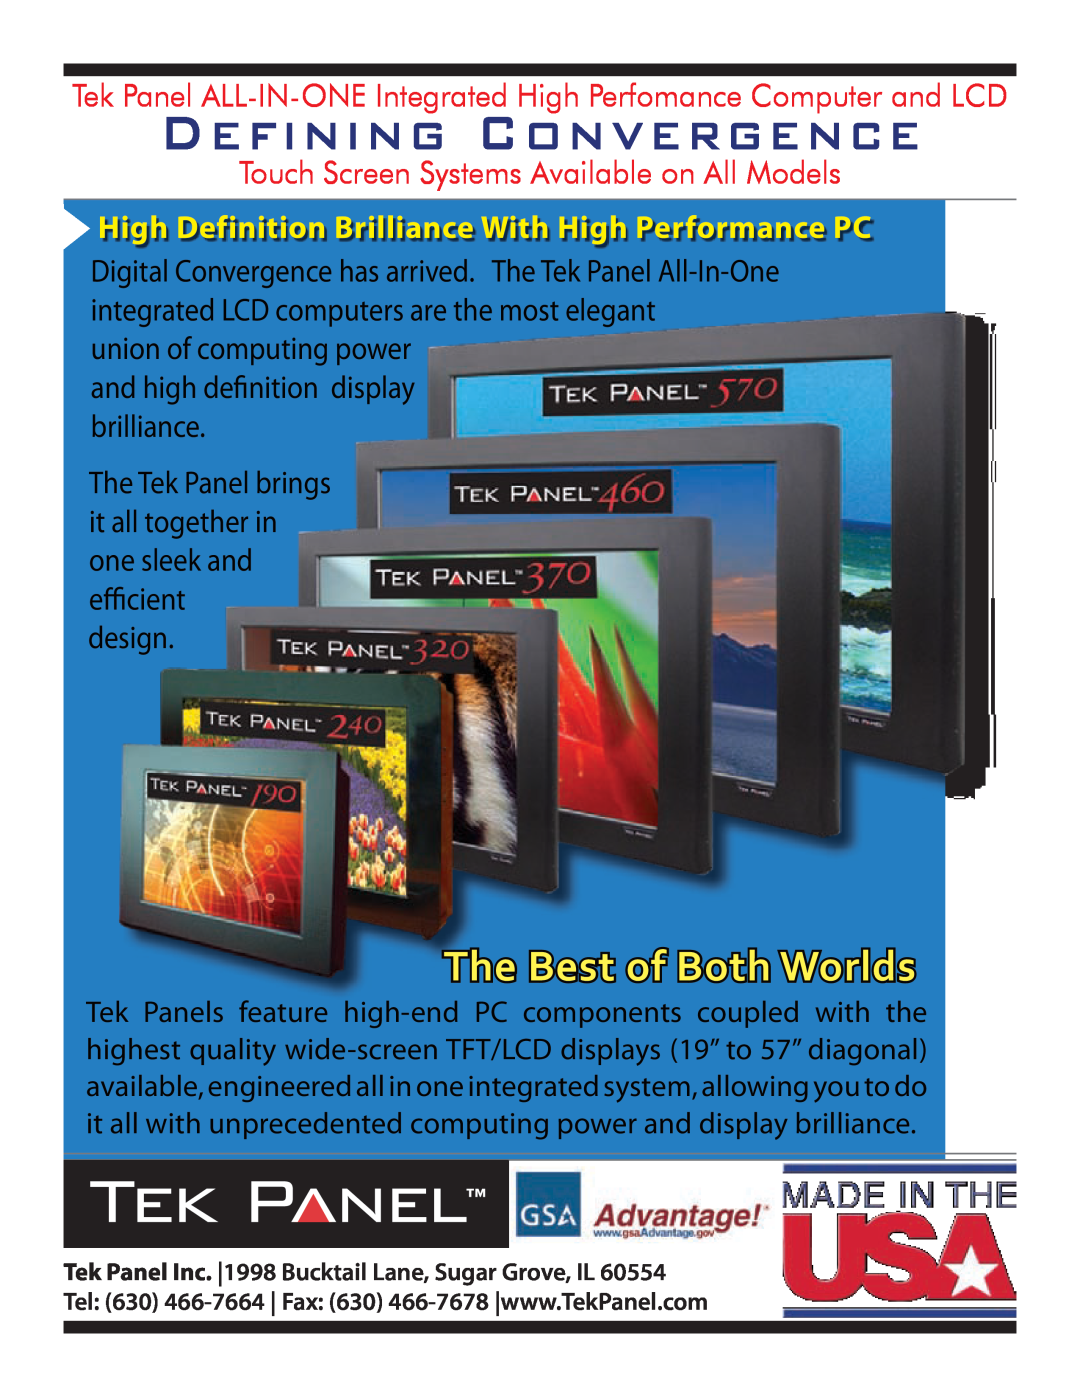 Hy-Tek Manufacturing 240 manual Defining Convergence, The Best of Both Worlds, design 